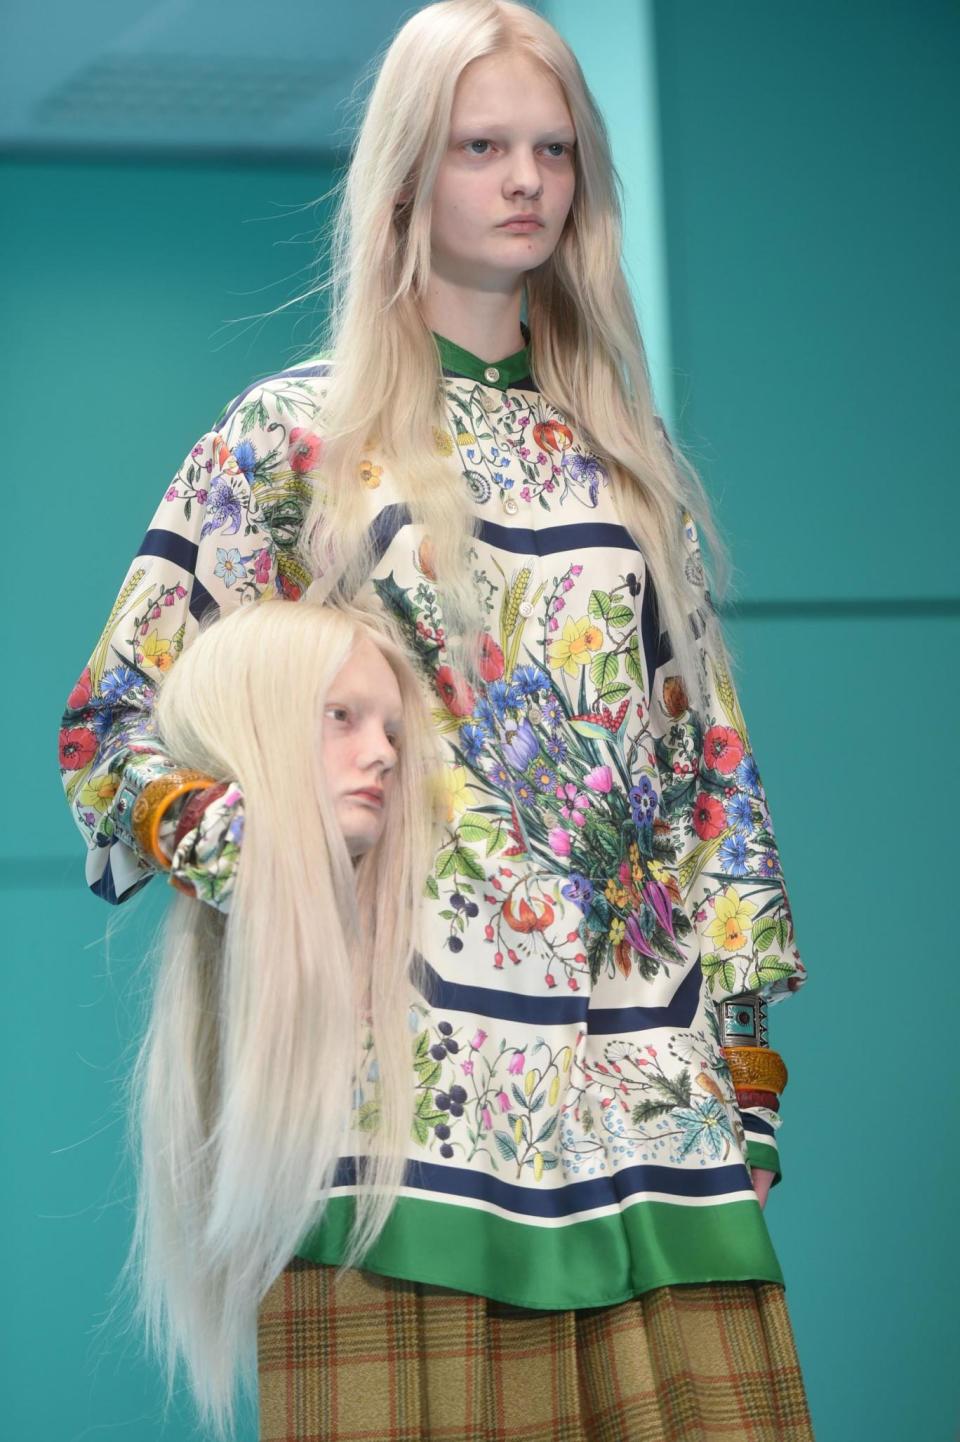 A model carries a severed head down the runway (AFP/Getty Images)